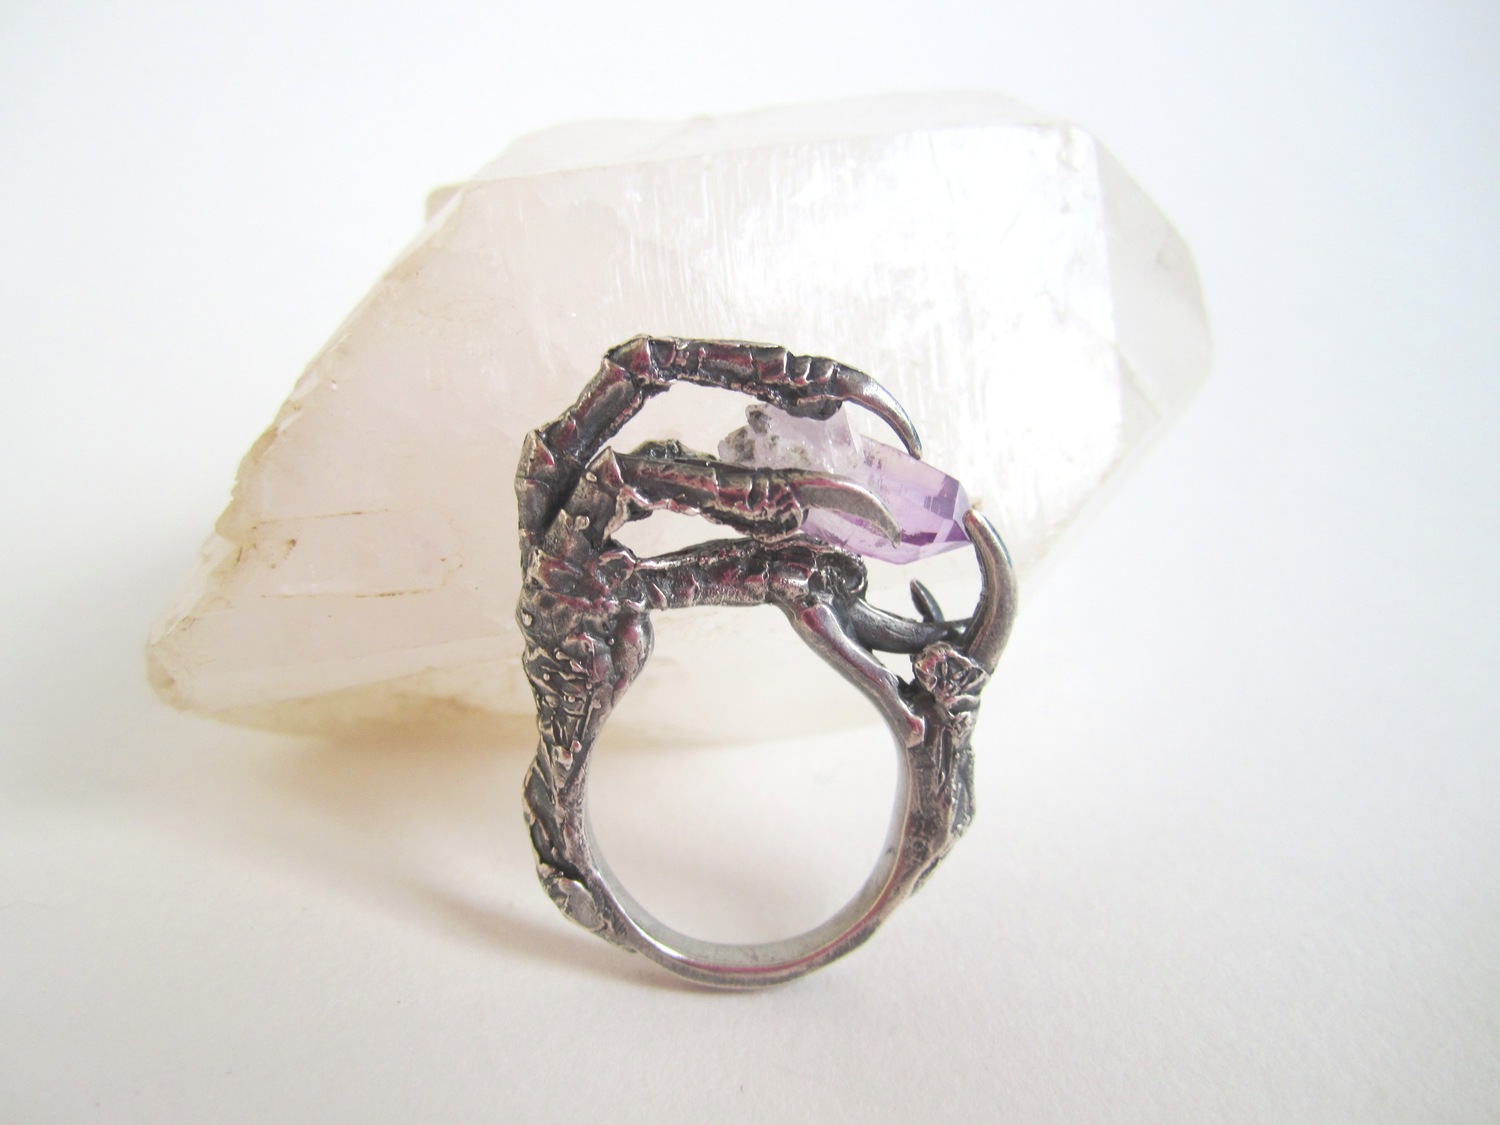 Amethyst Brass Claw Ring One of a Kind